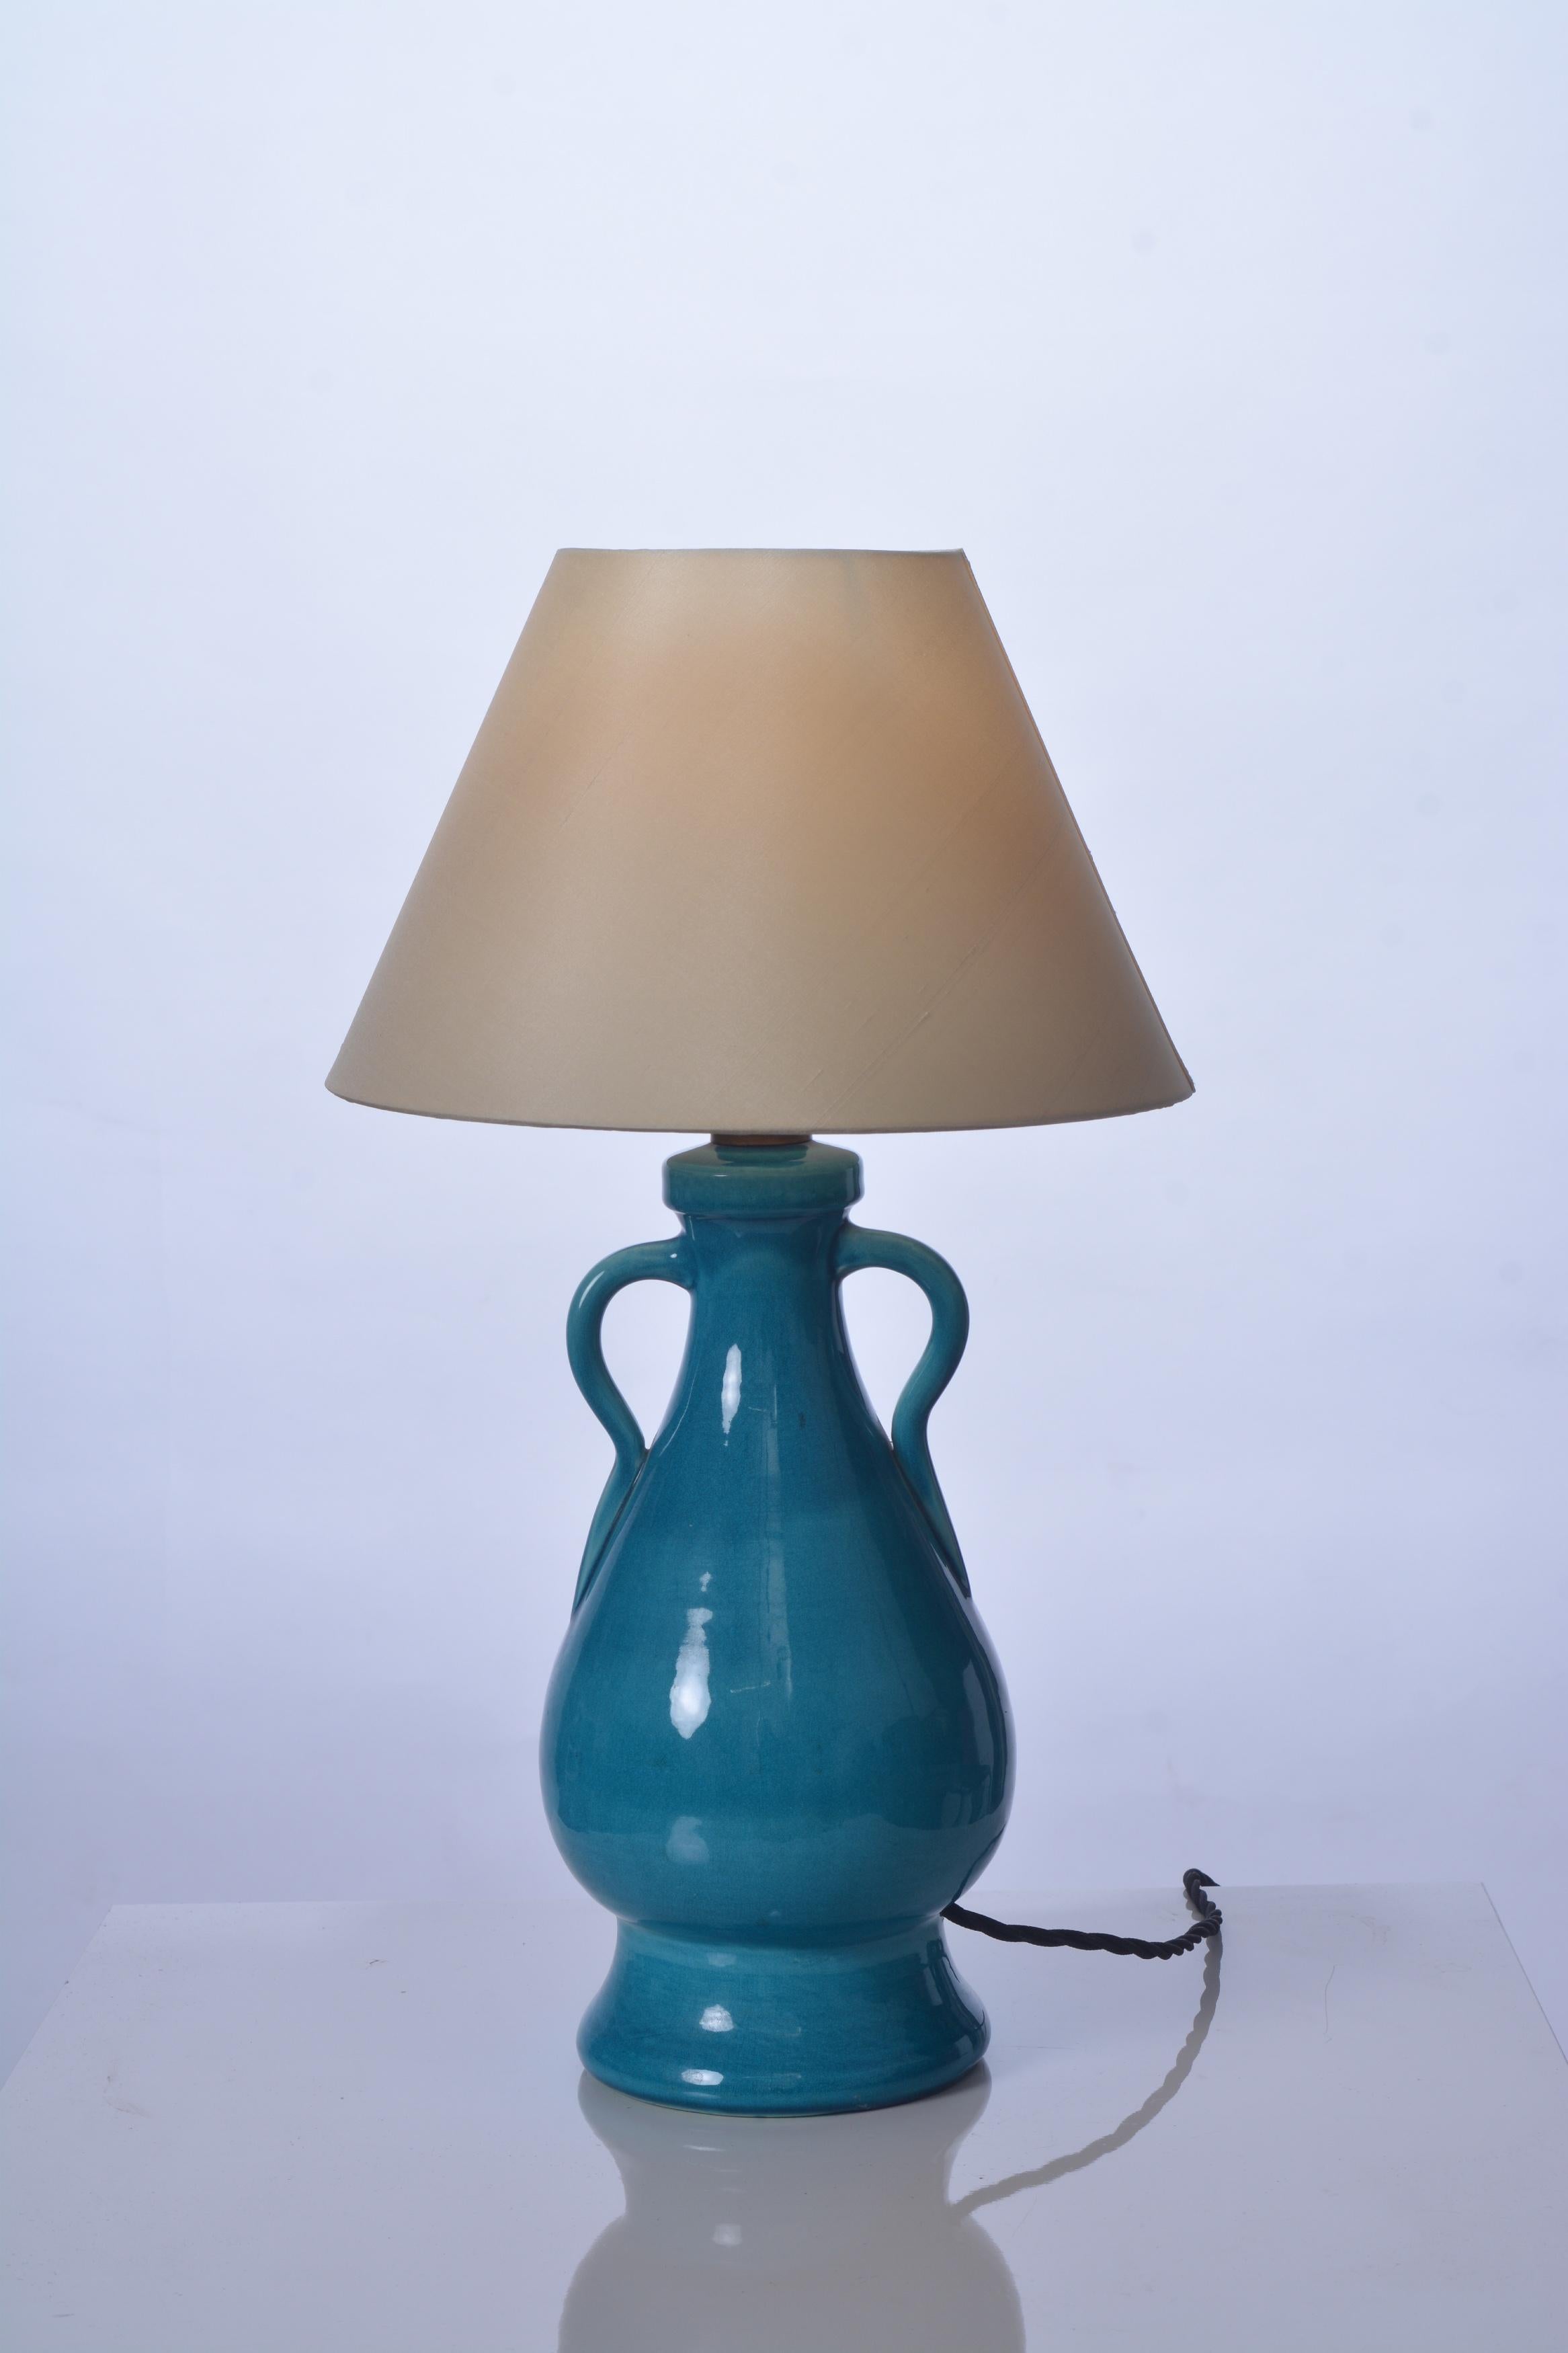 Modern Turquoise ceramic table lamp by Accolay, France c.1955 For Sale